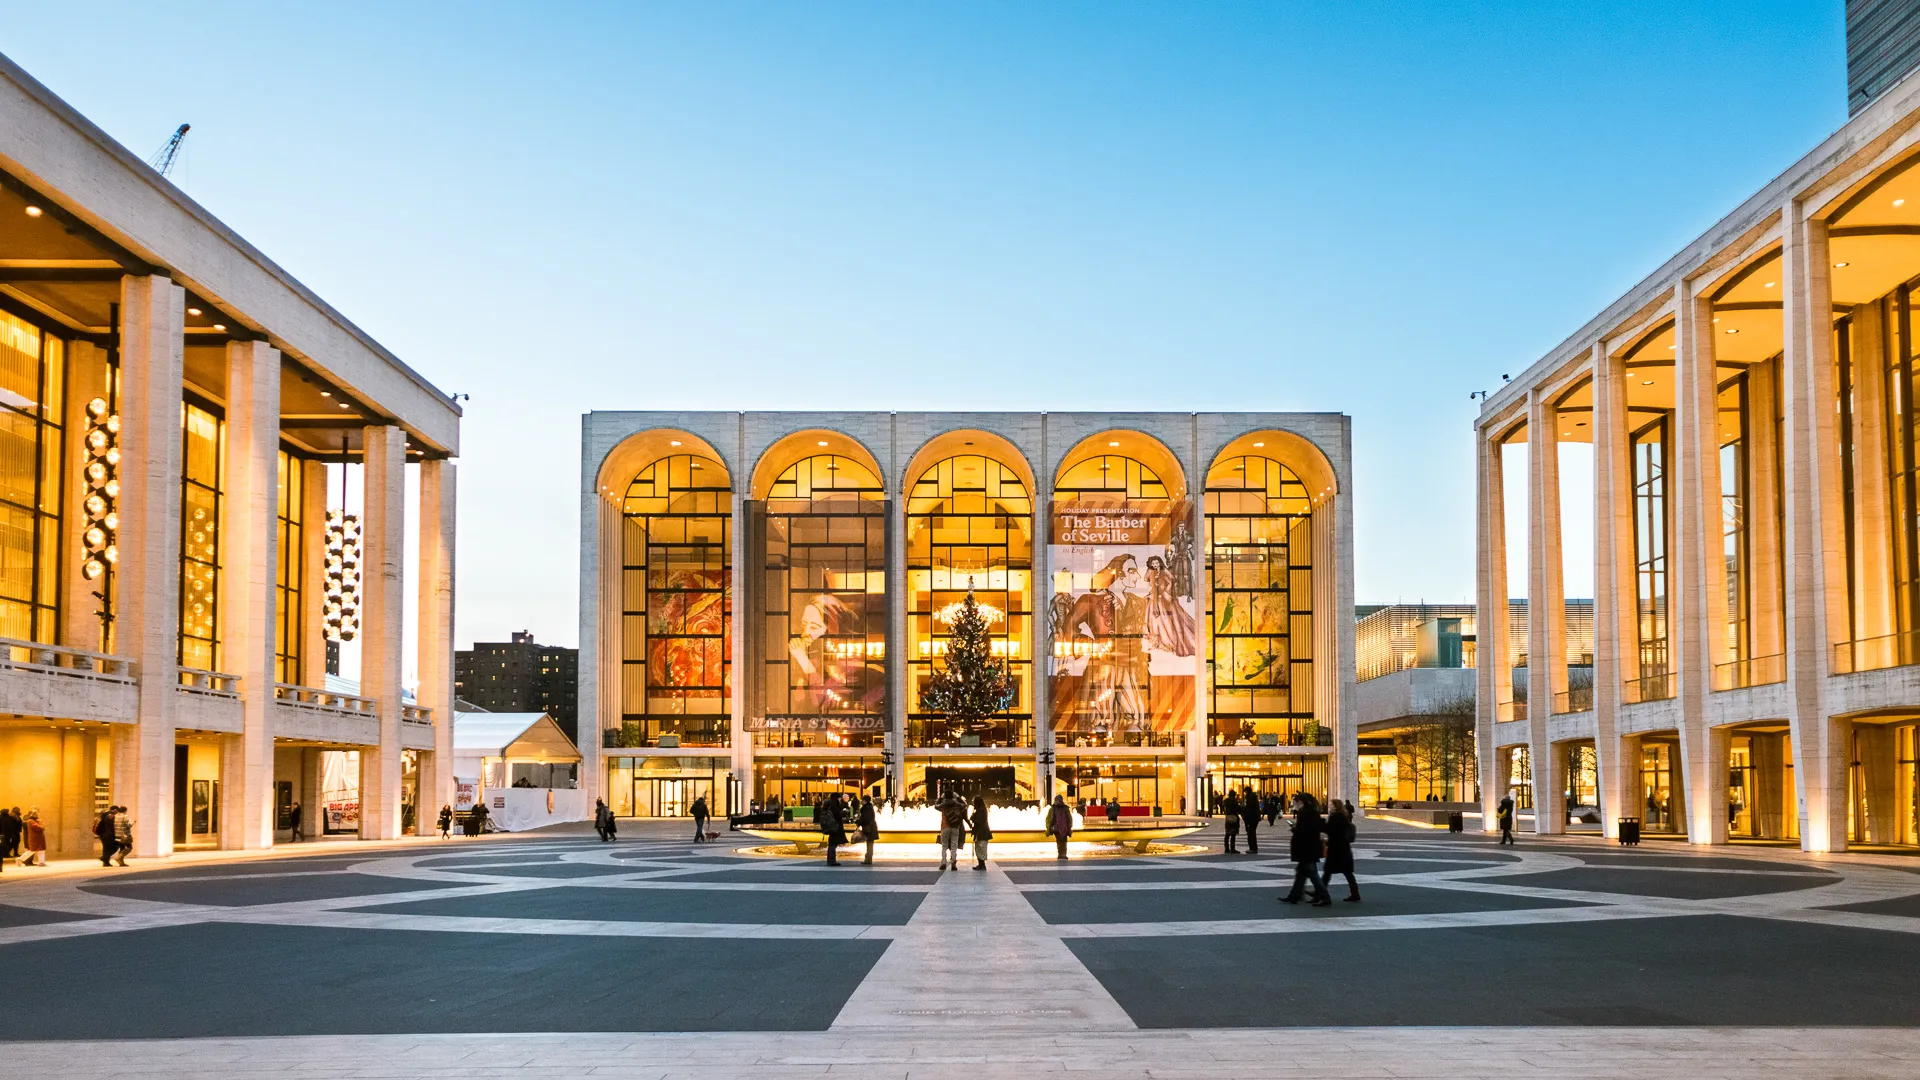 "New York, United States - December 6, 2012: People going to the opera The Barber of Seville at The Lincoln Center, one of the world's leading venue presenting superb artistic programming such as theate, concerts, dance, cinema and poetry.